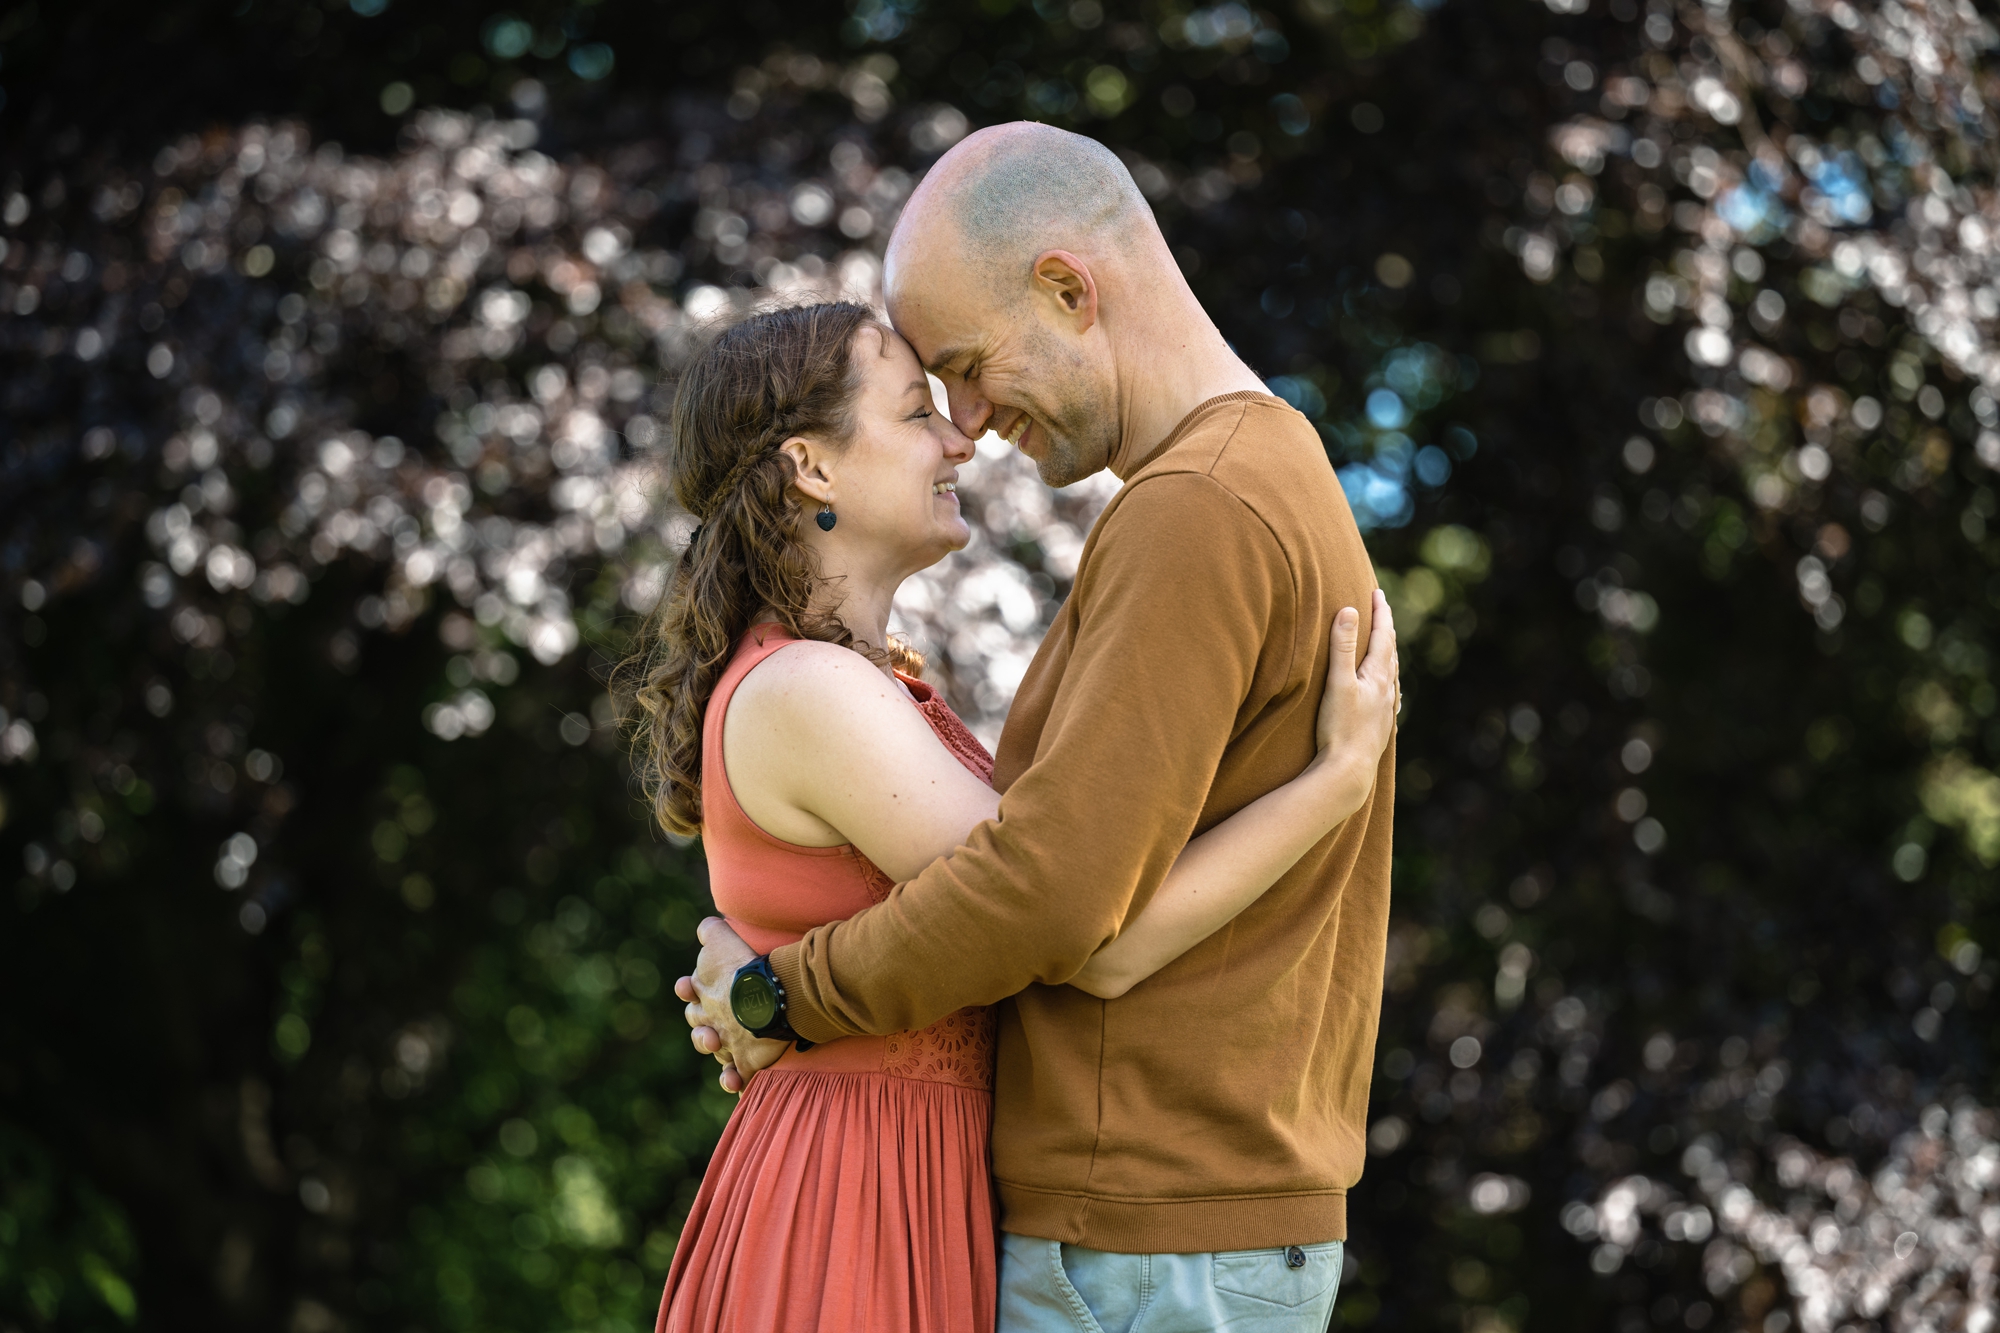 Quiet moment on autumn engagement shoot in front of autumnal trees in Hertfordshire